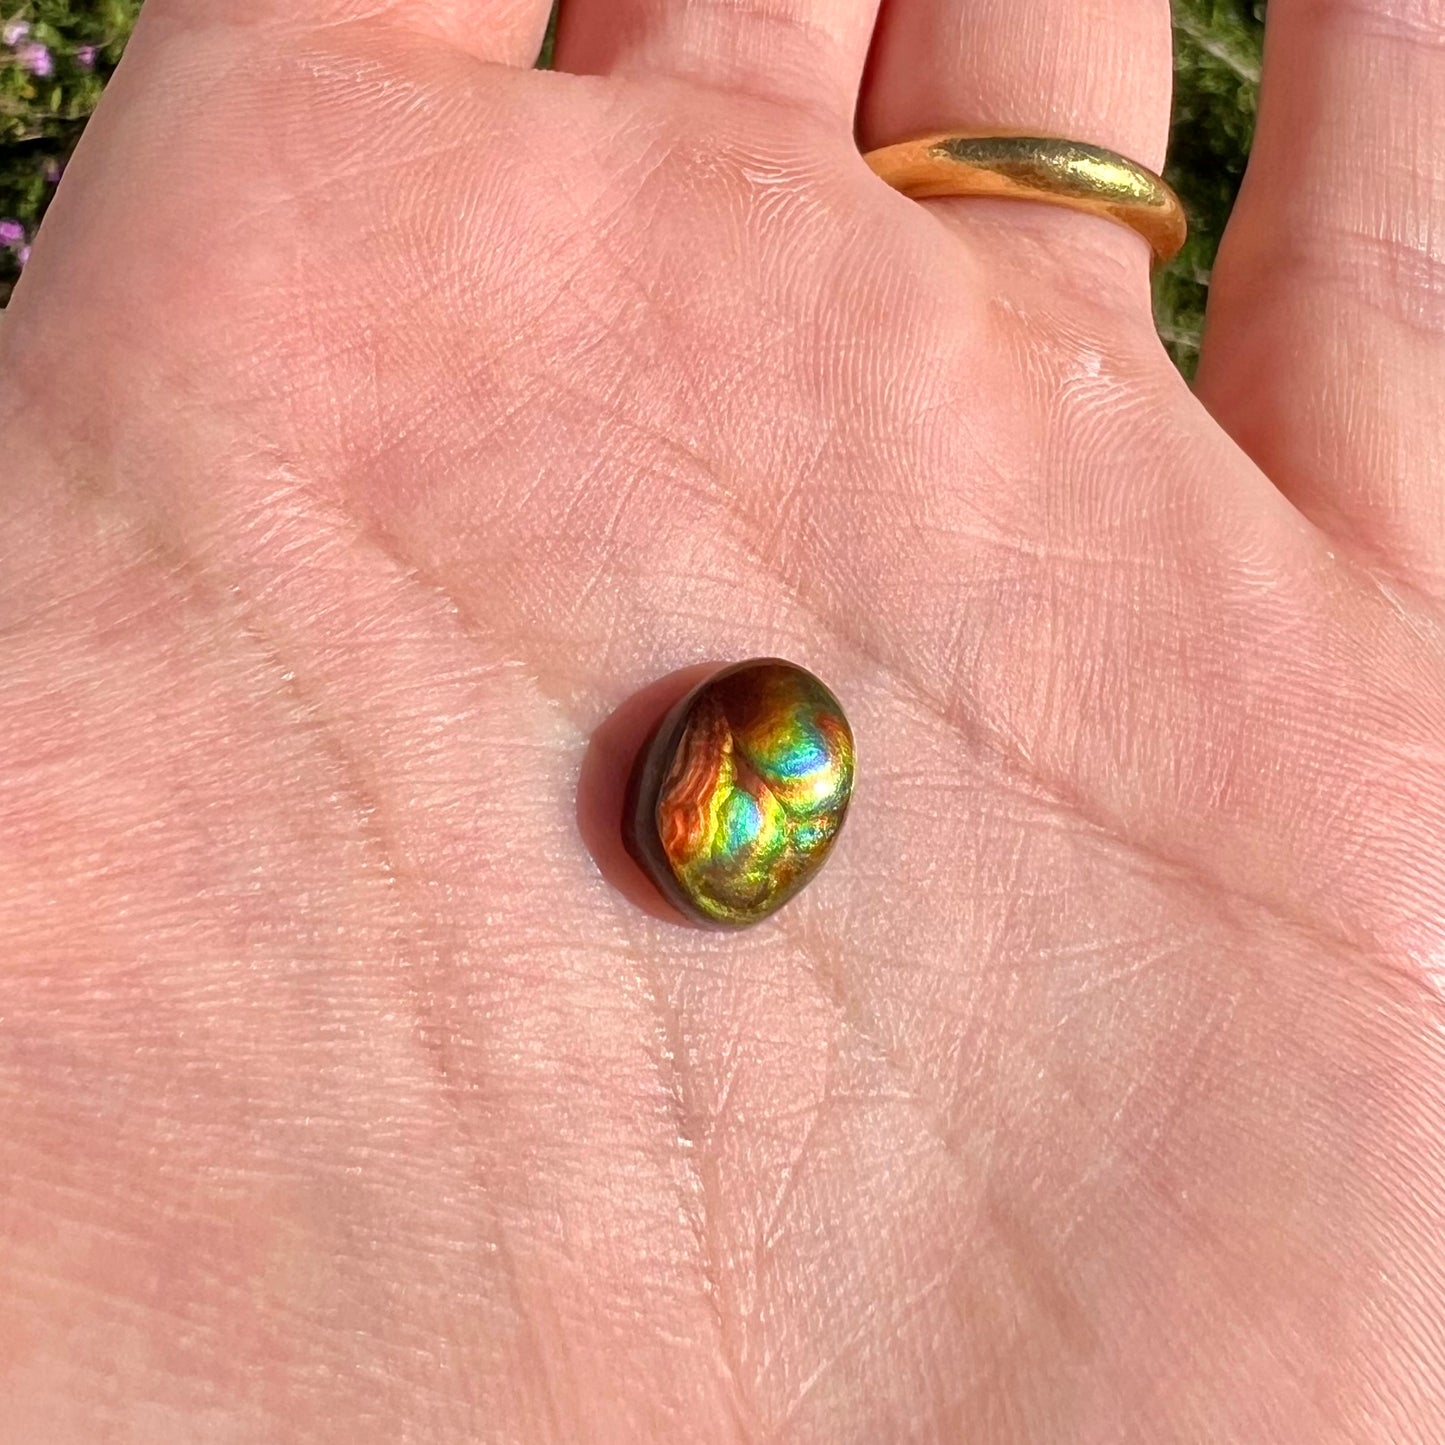 A loose, imperial grade Mexican fire agate gemstone.  The stone brightly glows every color in the sunlight.